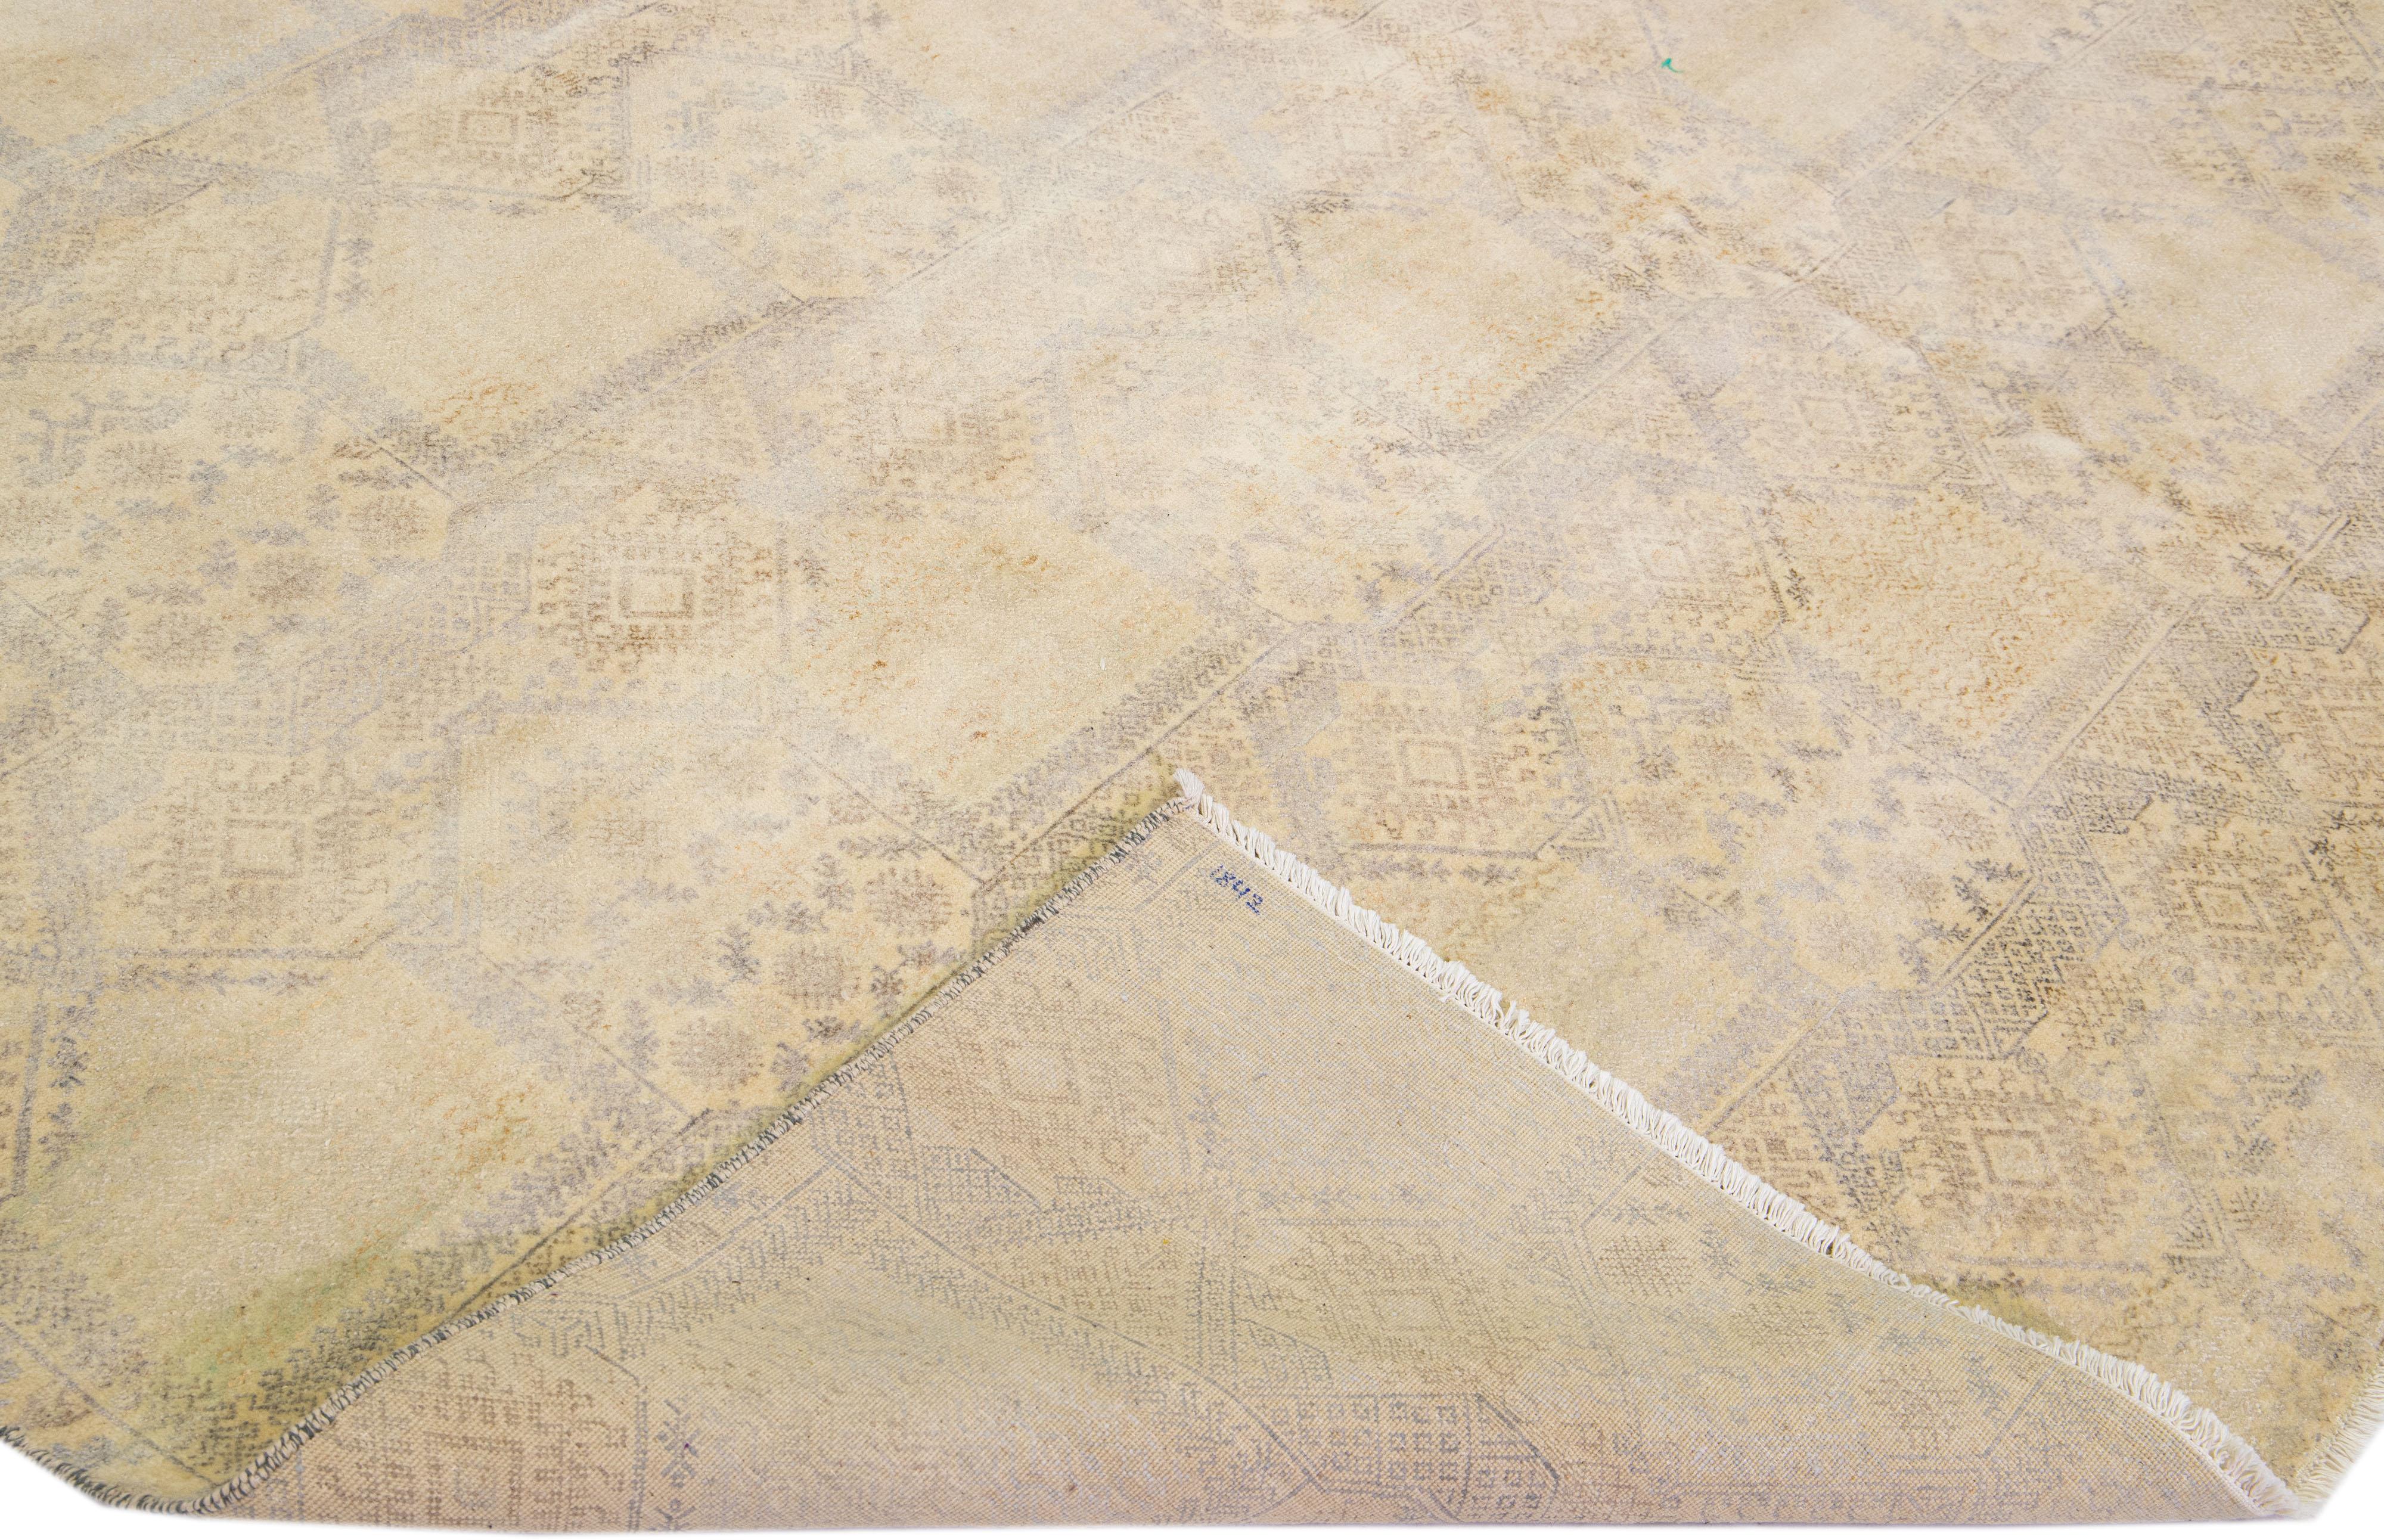 Beautiful Contemporary hand-knotted Indian wool rug with a detailed beige field. This rug has gray color accents in an all-over geometric pattern design.

This rug measures: 11'9